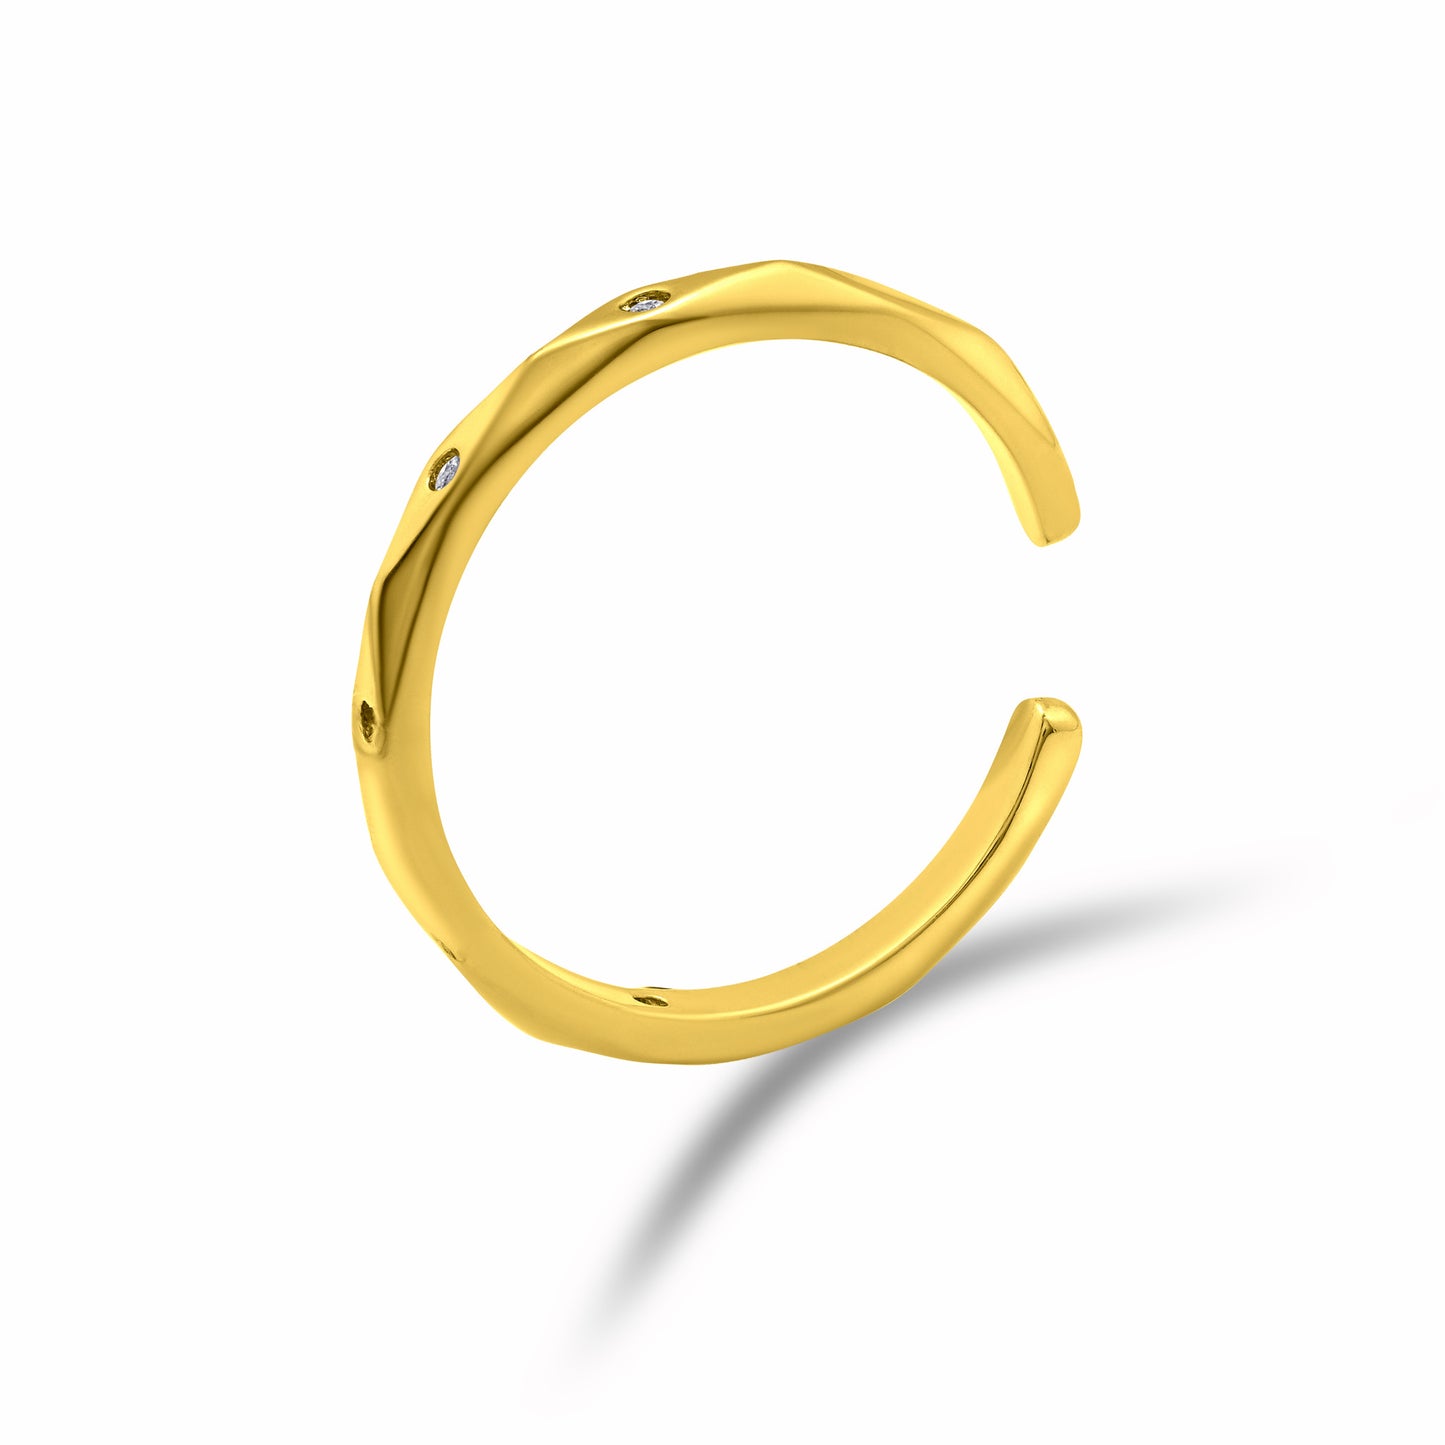 Graphic CZ Gold Ring